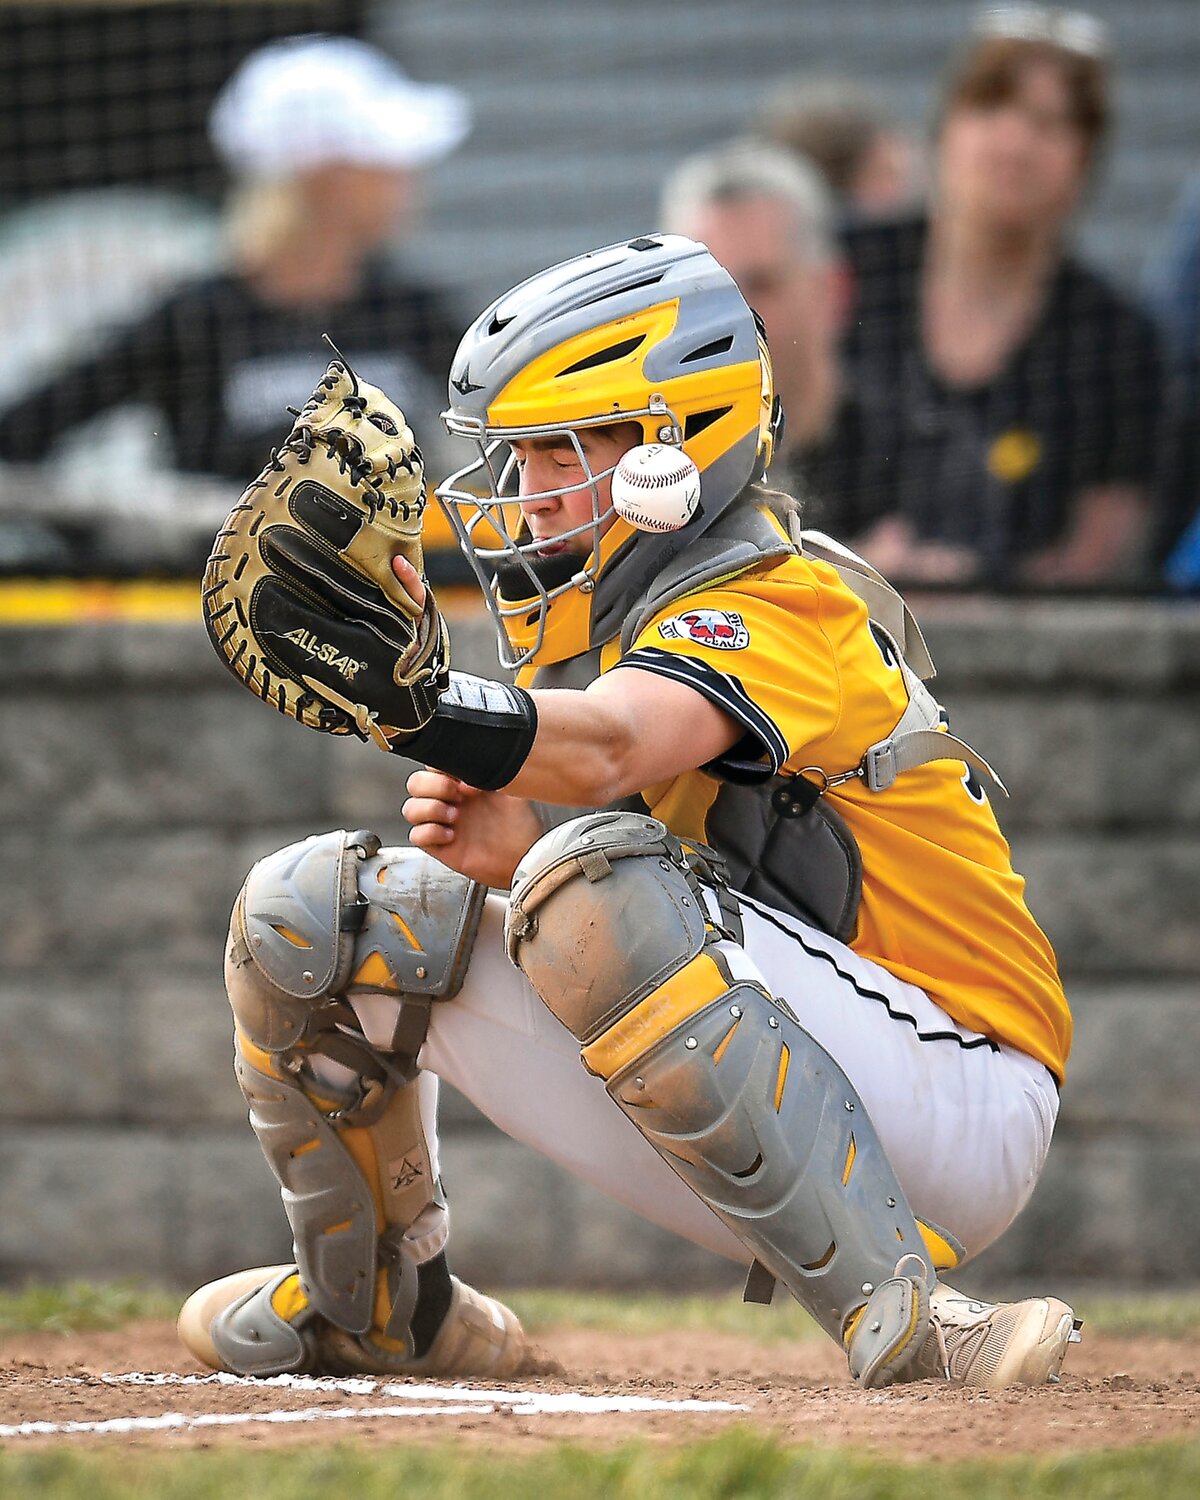 Archbishop Wood catcher Logan Madison takes a foul ball off the shoulder in the first inning.